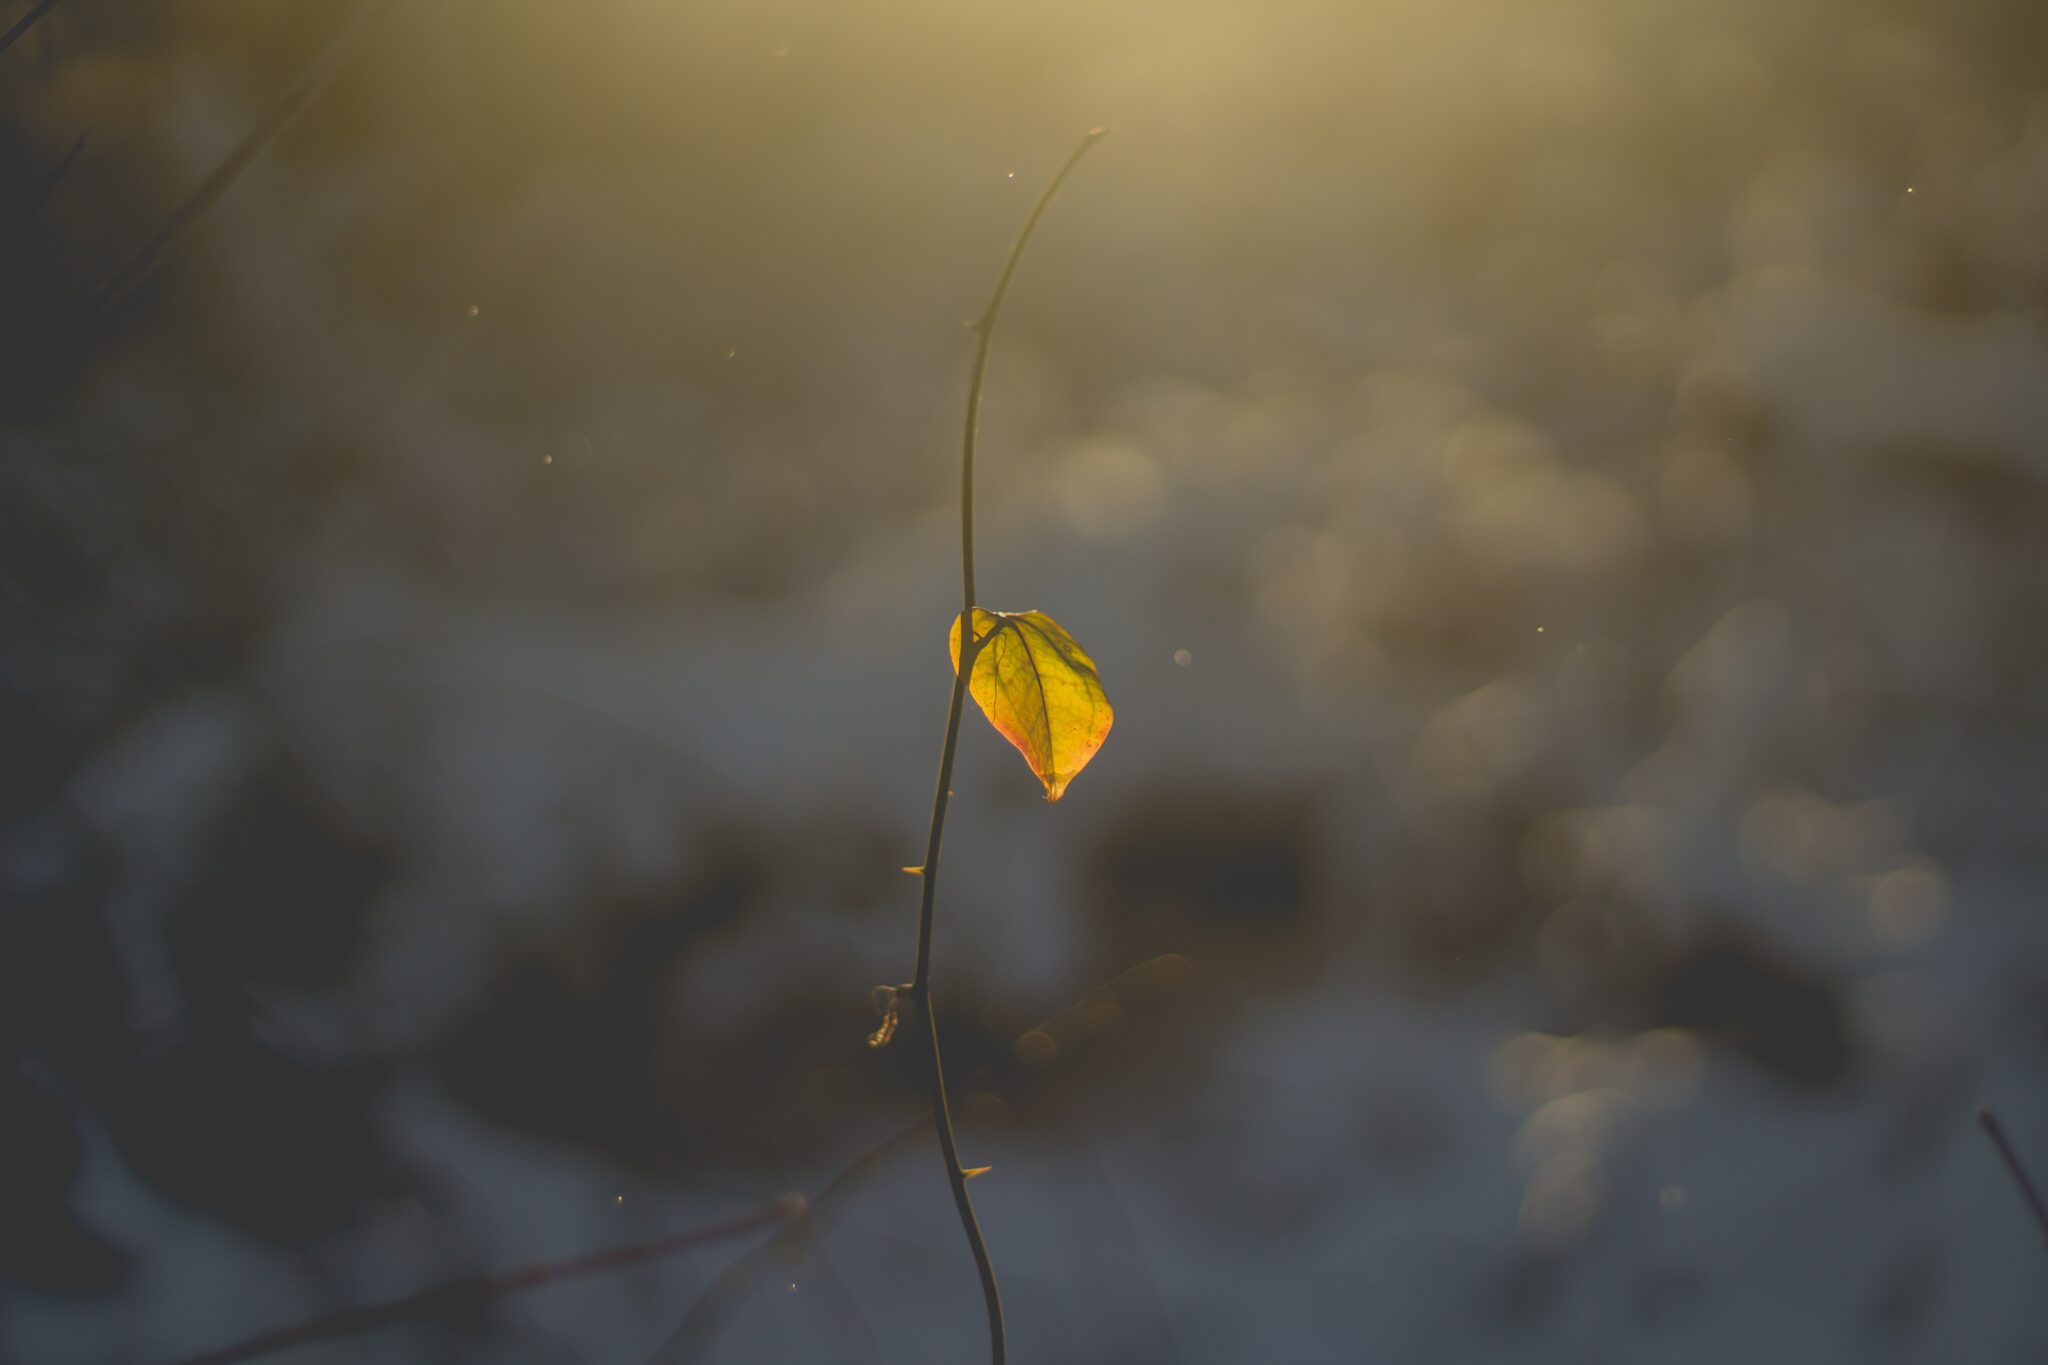 https://unsplash.com/photos/close-up-photo-of-withered-plant-with-yellow-leaf-UCQkkkFQE5k